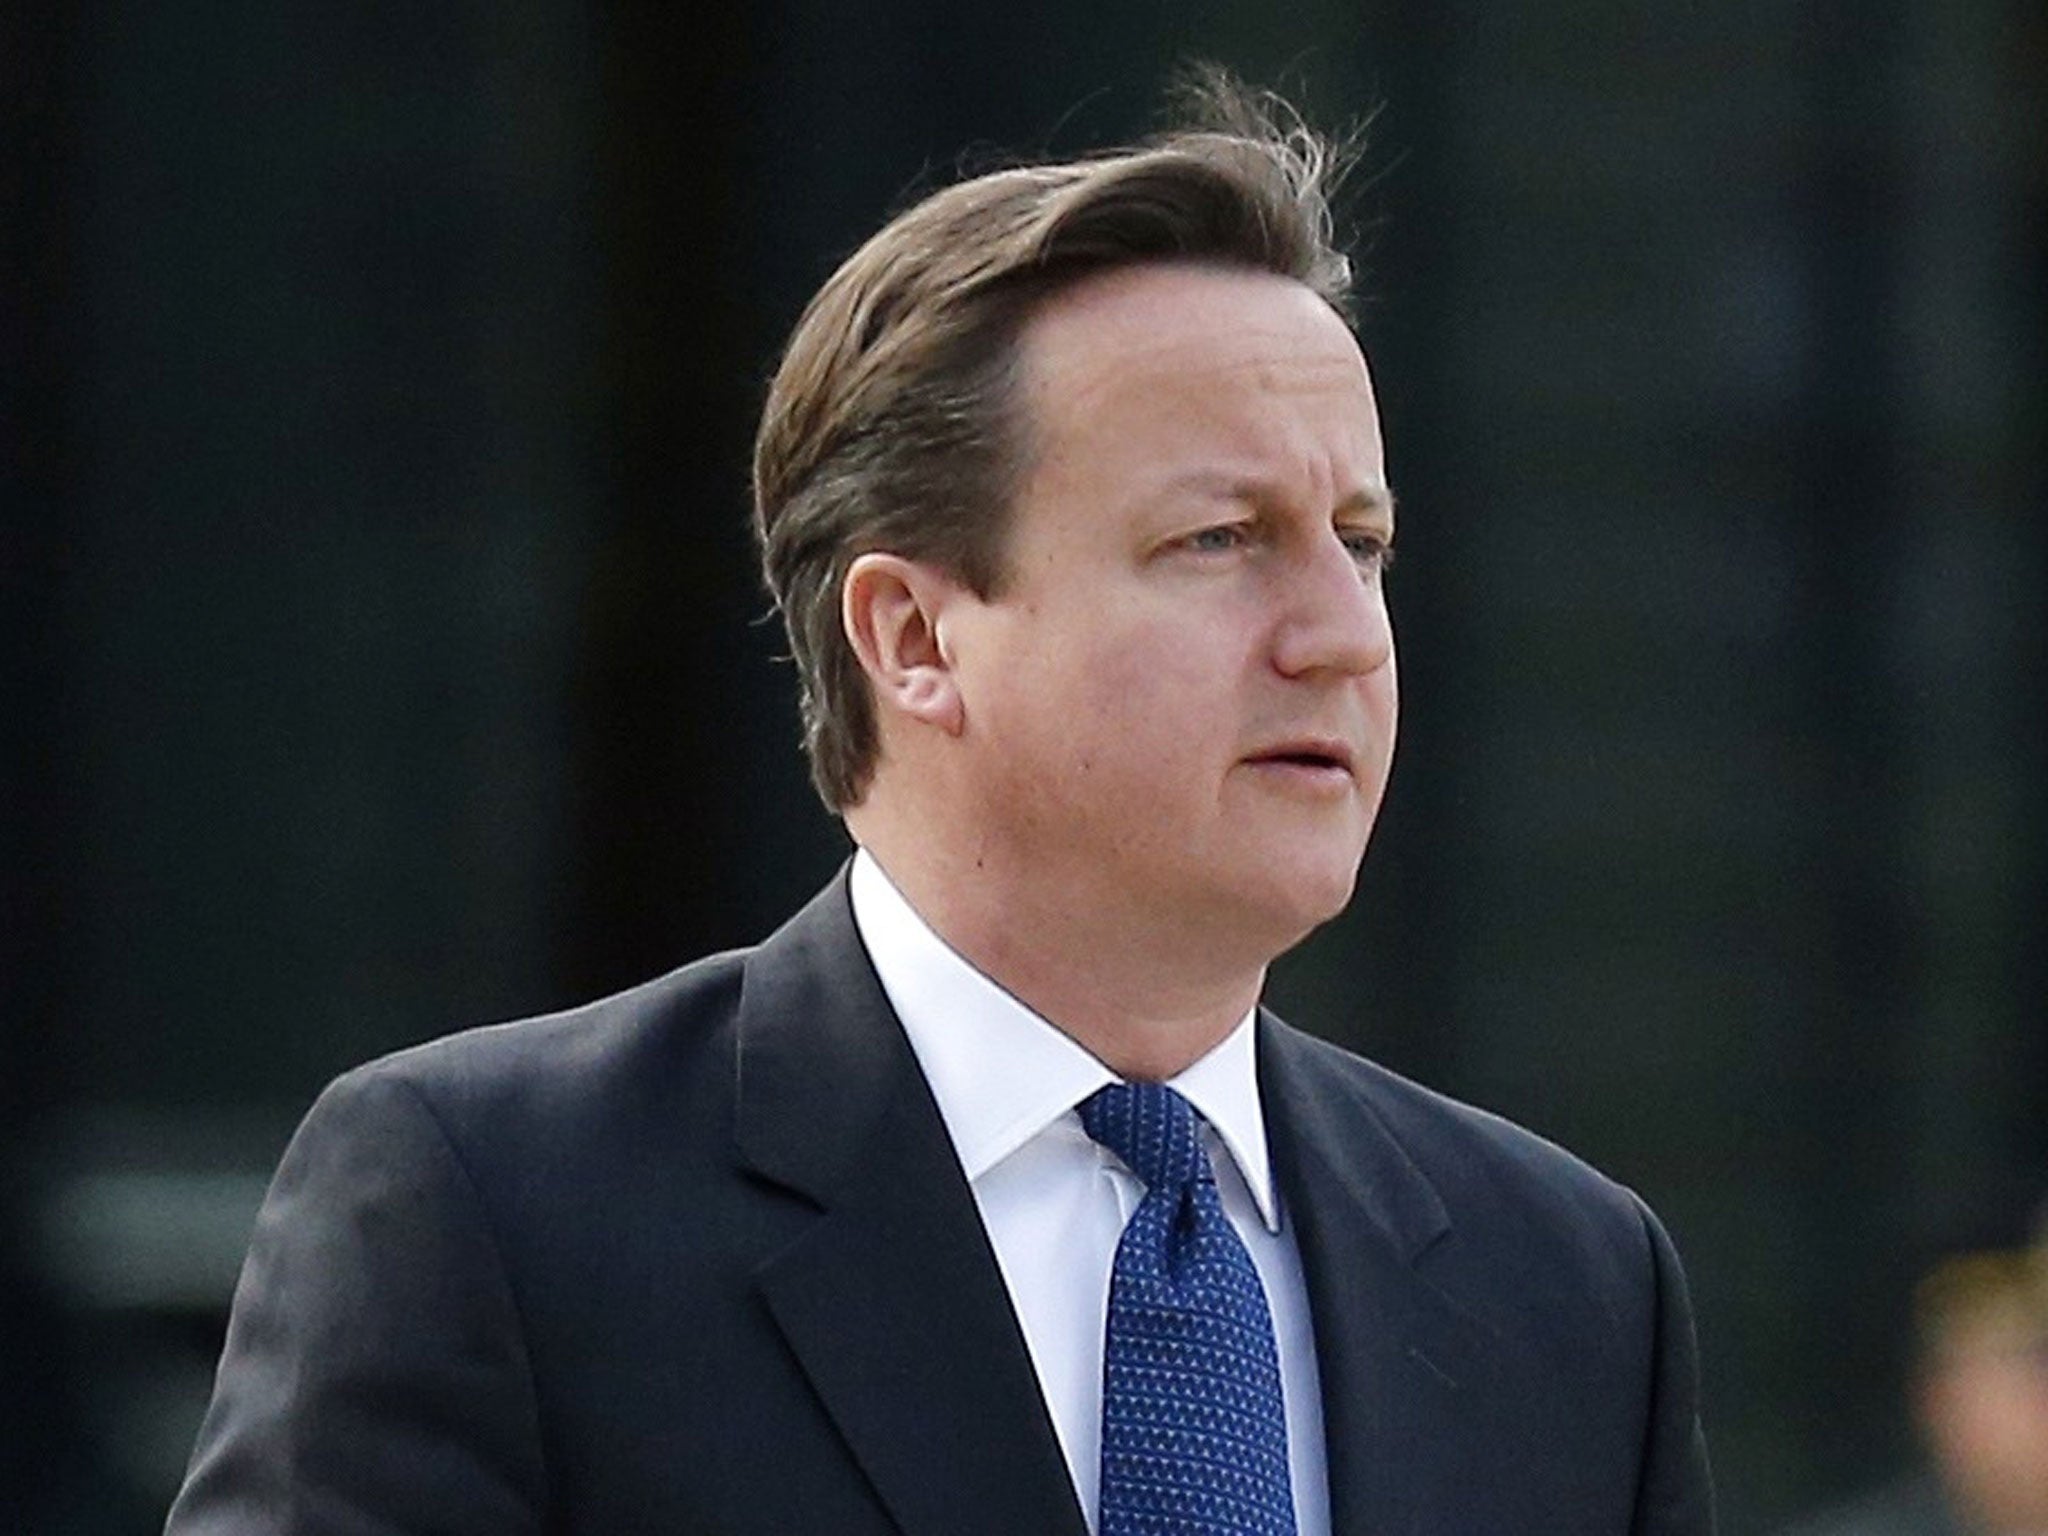 David Cameron has appointed a former lobbyist for British Gas to be his personal advisor on energy and climate change